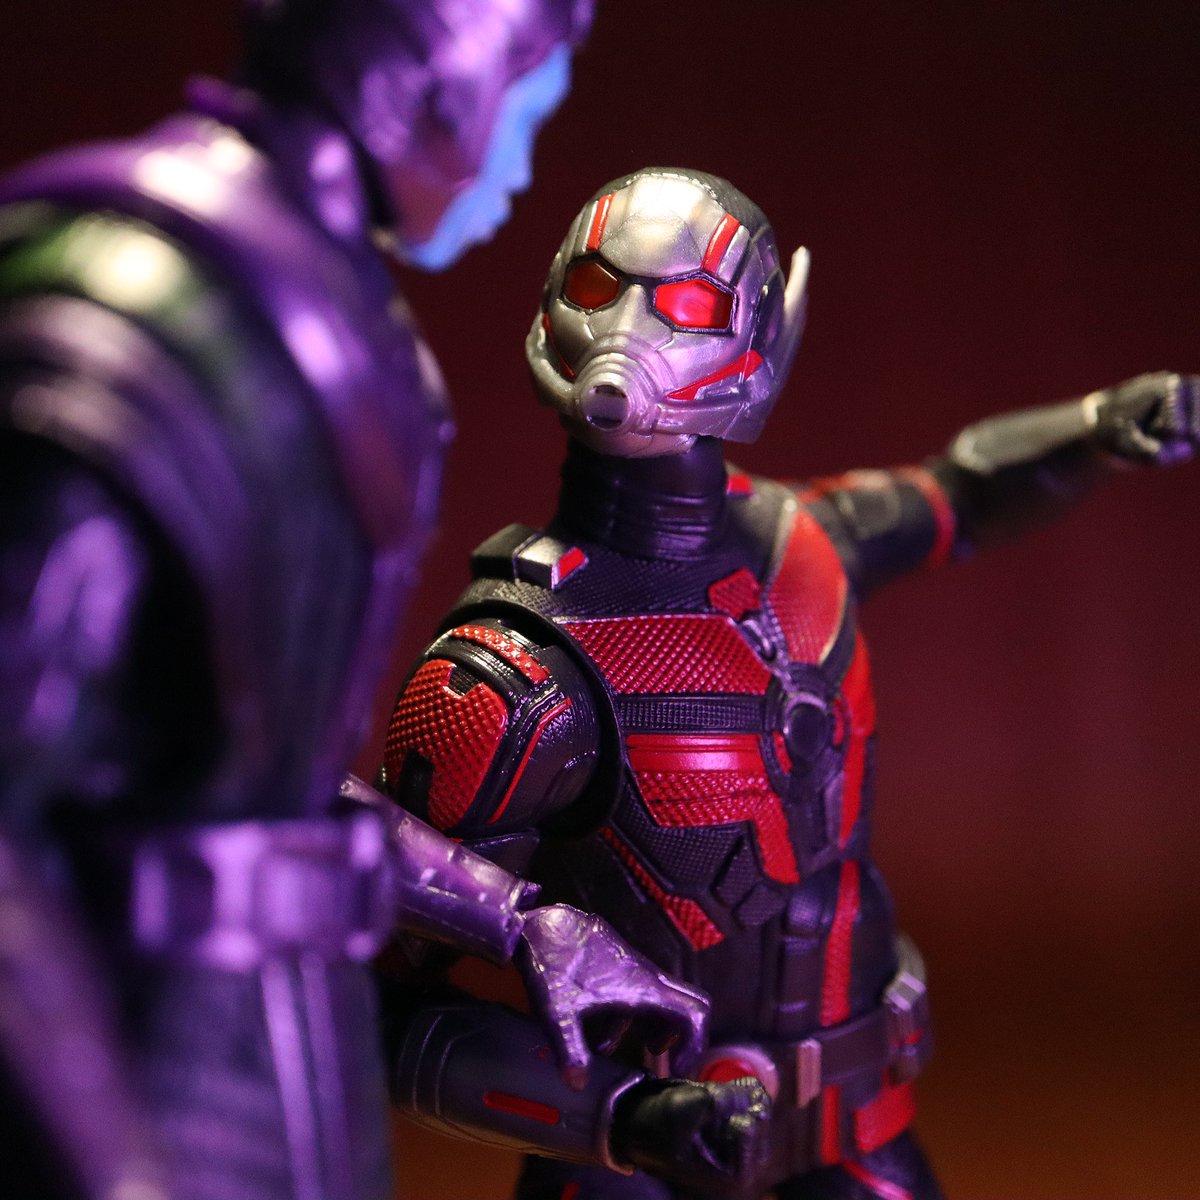 #AntMan And #TheWasp #Quantumania #Kang #TheConqueror #Marvel #Legends